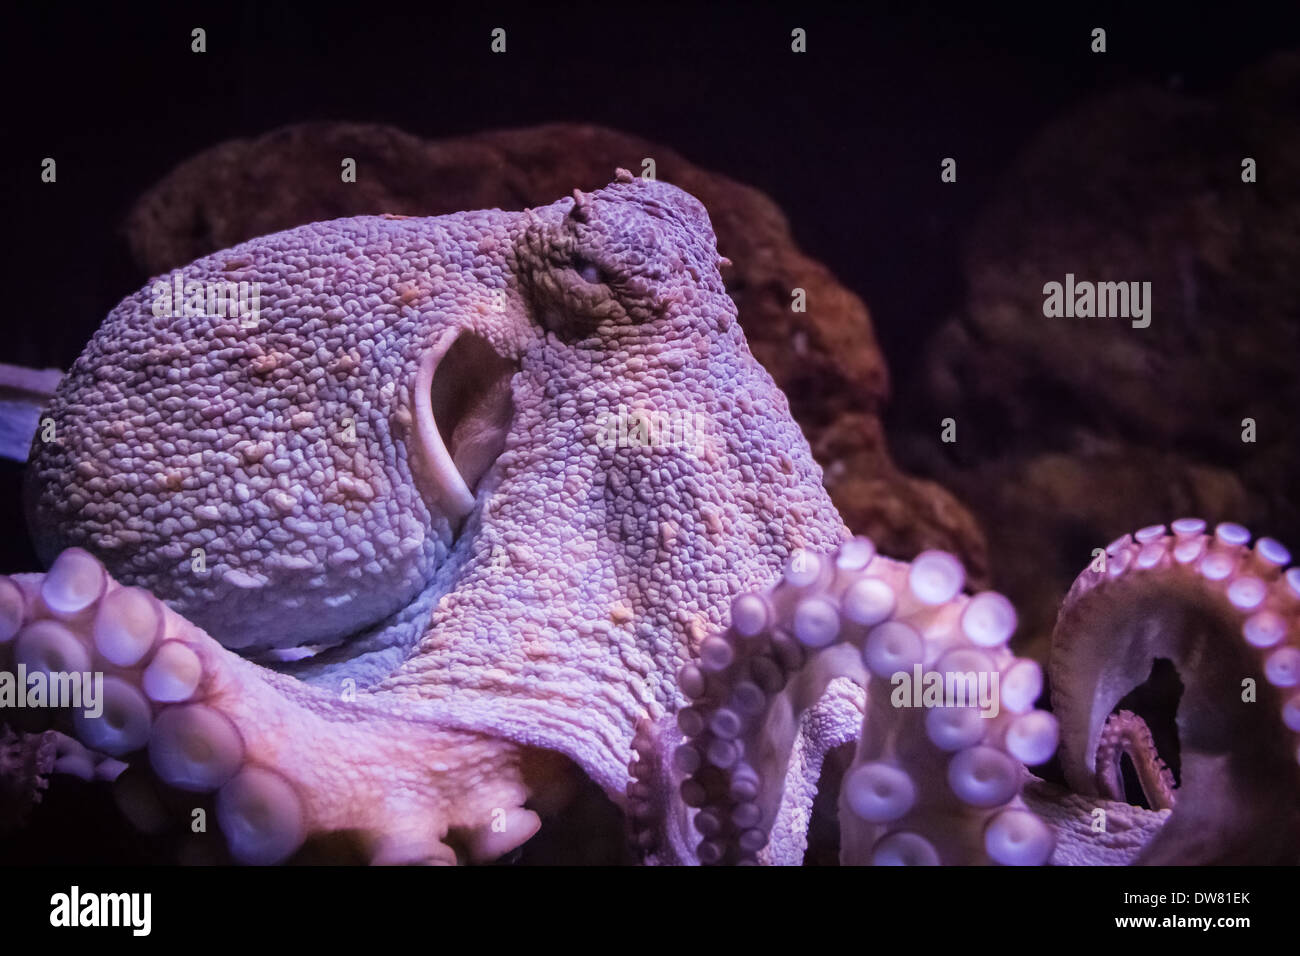 A purple octopus with cruel eyes Stock Photo